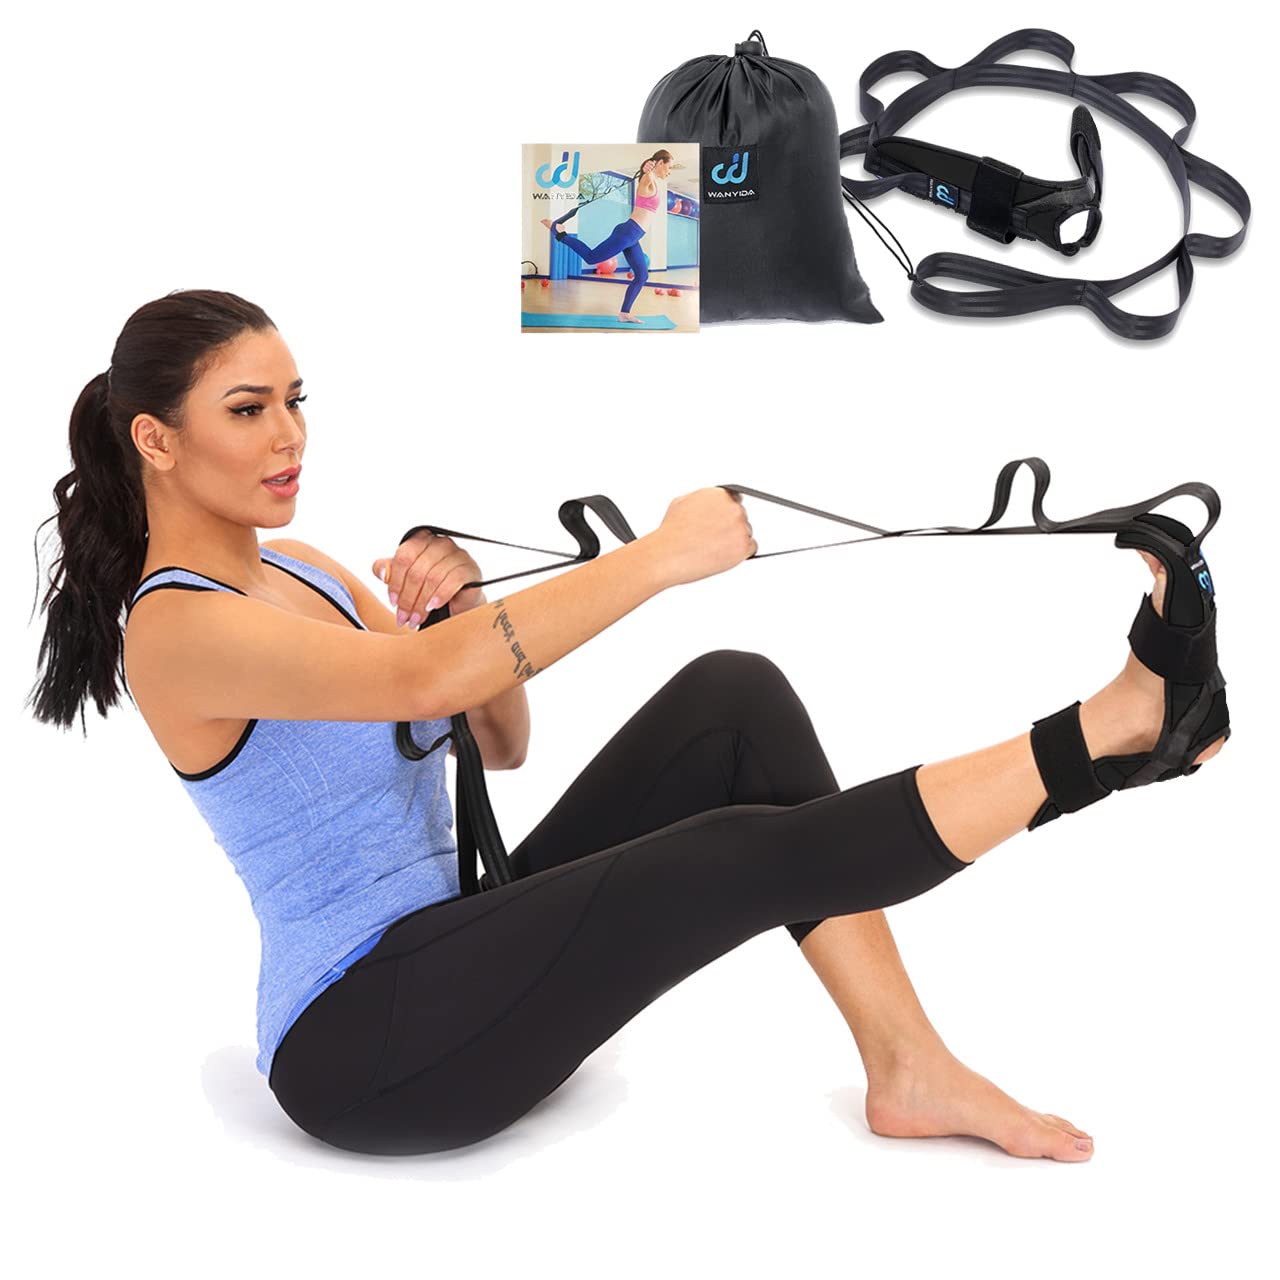 Calf Stretcher & Foot Stretcher for Plantar Fasciitis, Ligament Stretch  Strap, Leg Stretcher Strap Belt to Improve Muscle Recovery for Senior,  Dancers